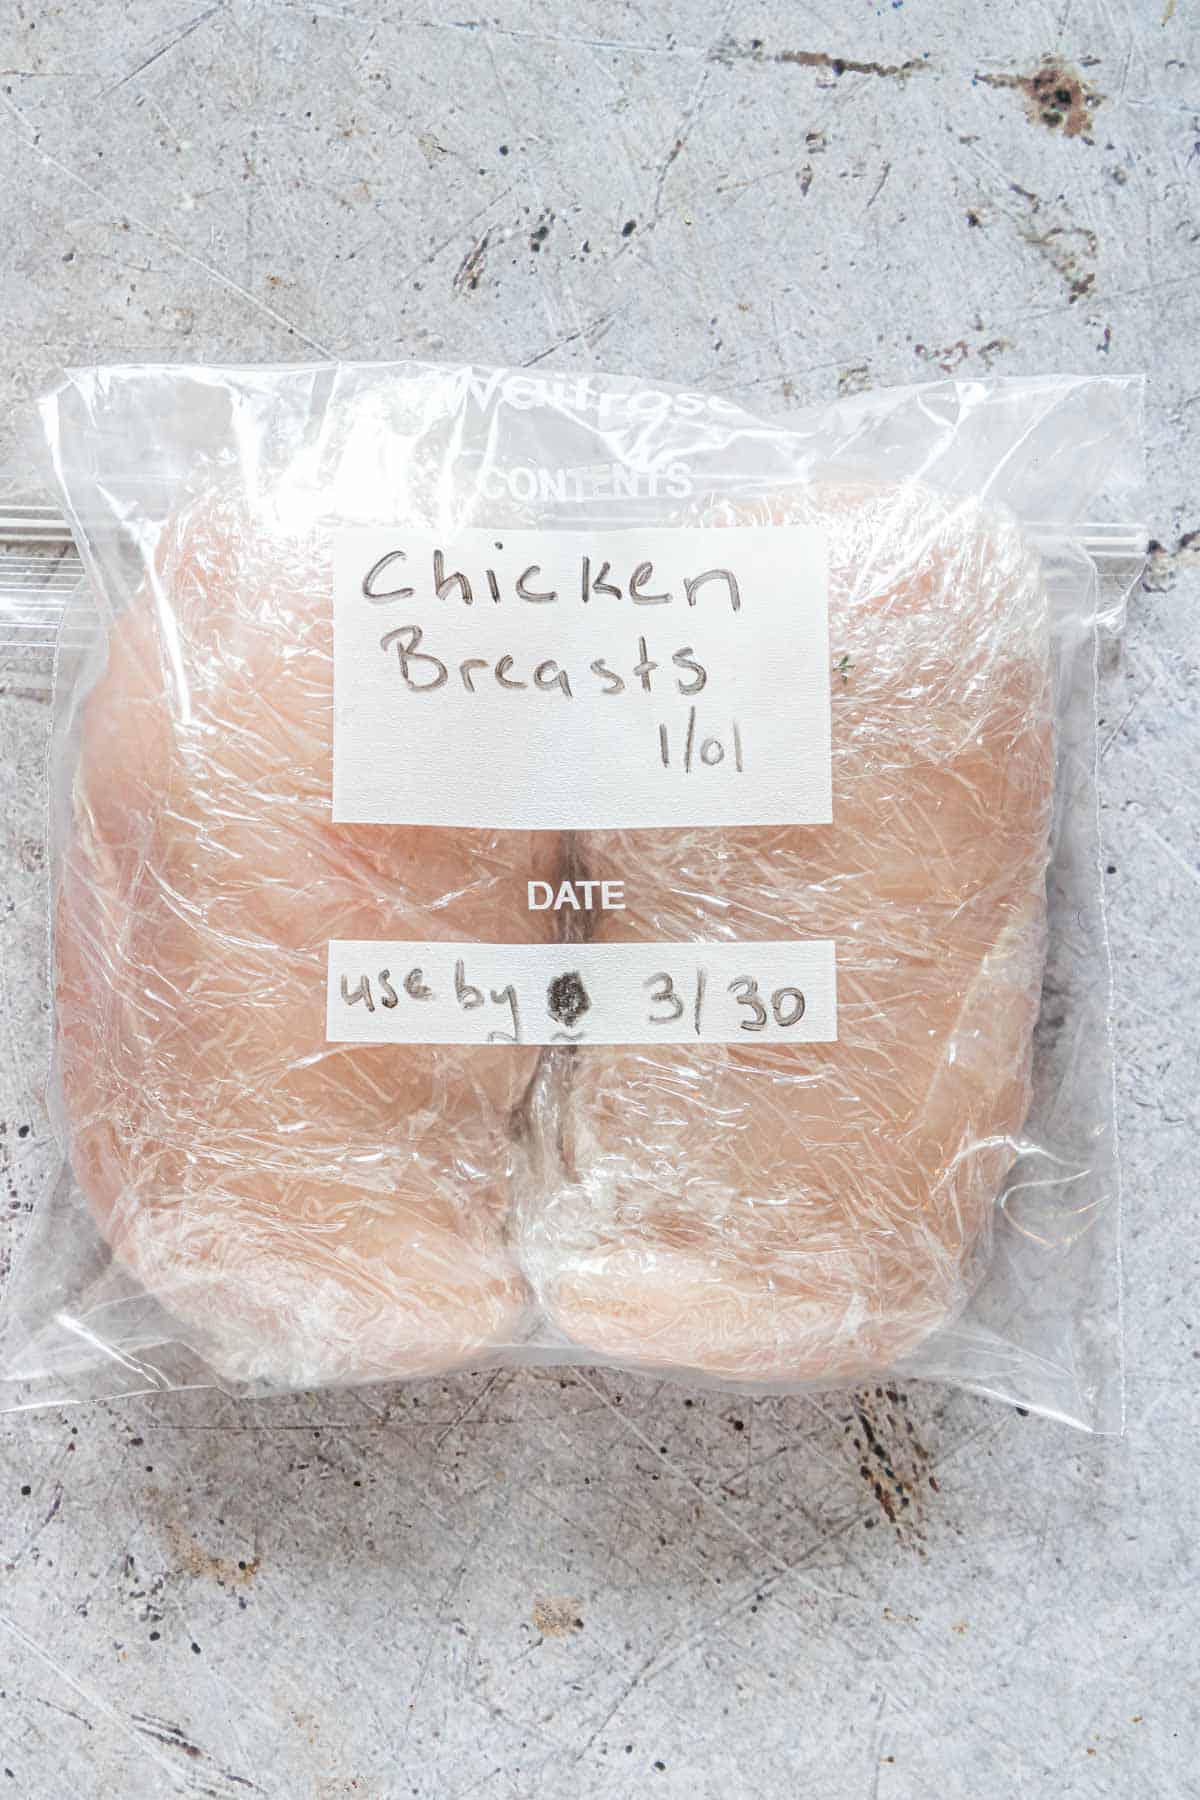 two chicken breasts in a plastic freezer bag